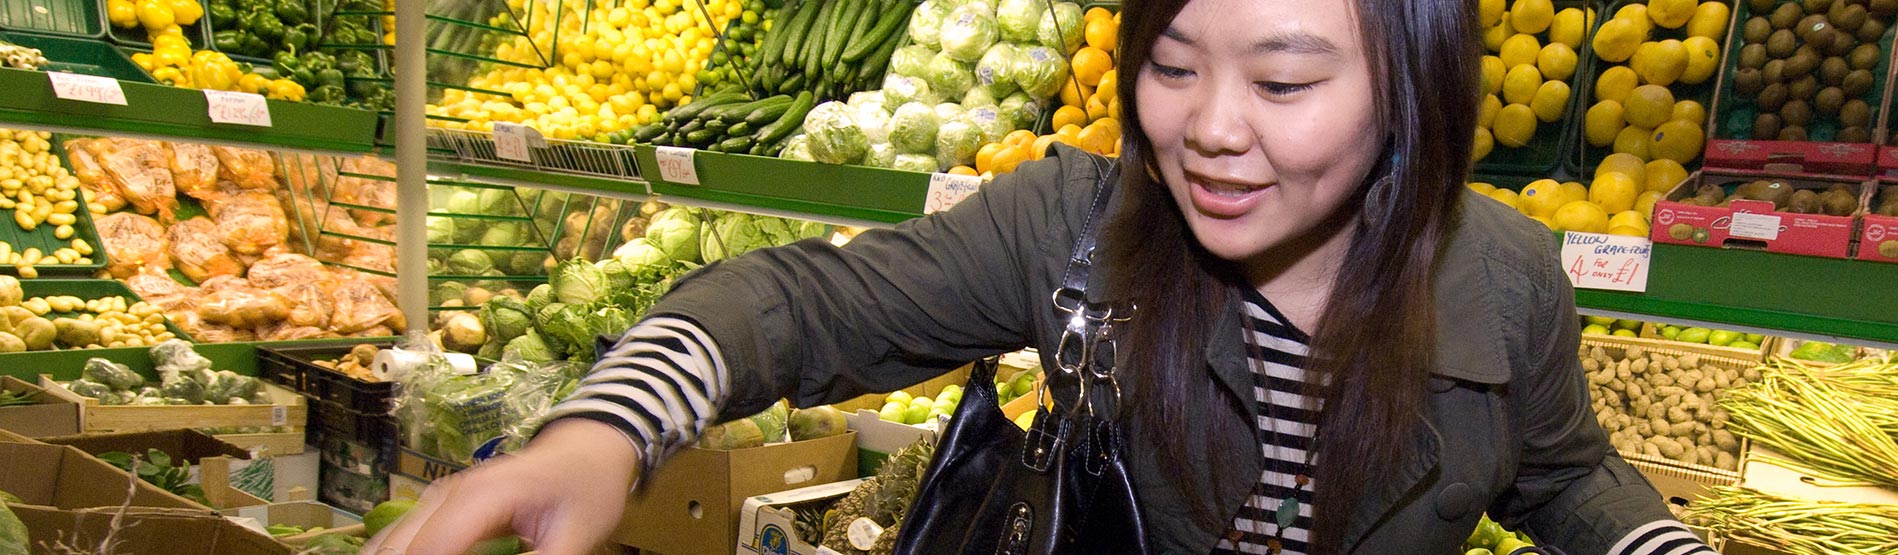 Student picking out vegetables in a supermarket.